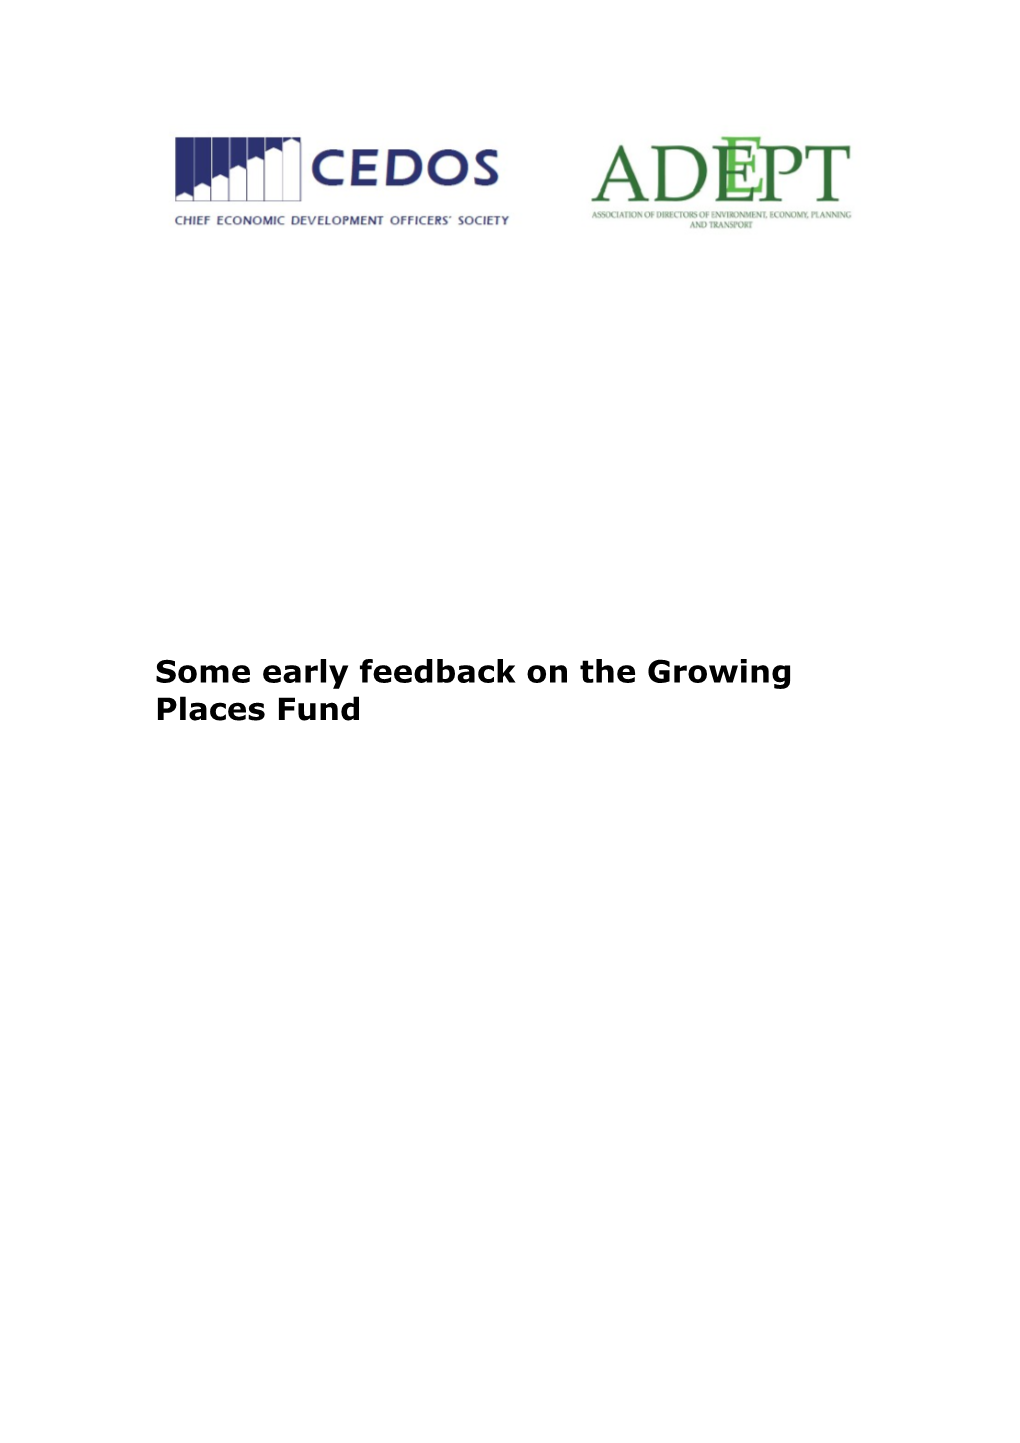 Some Early Feedback on the Growing Places Fund